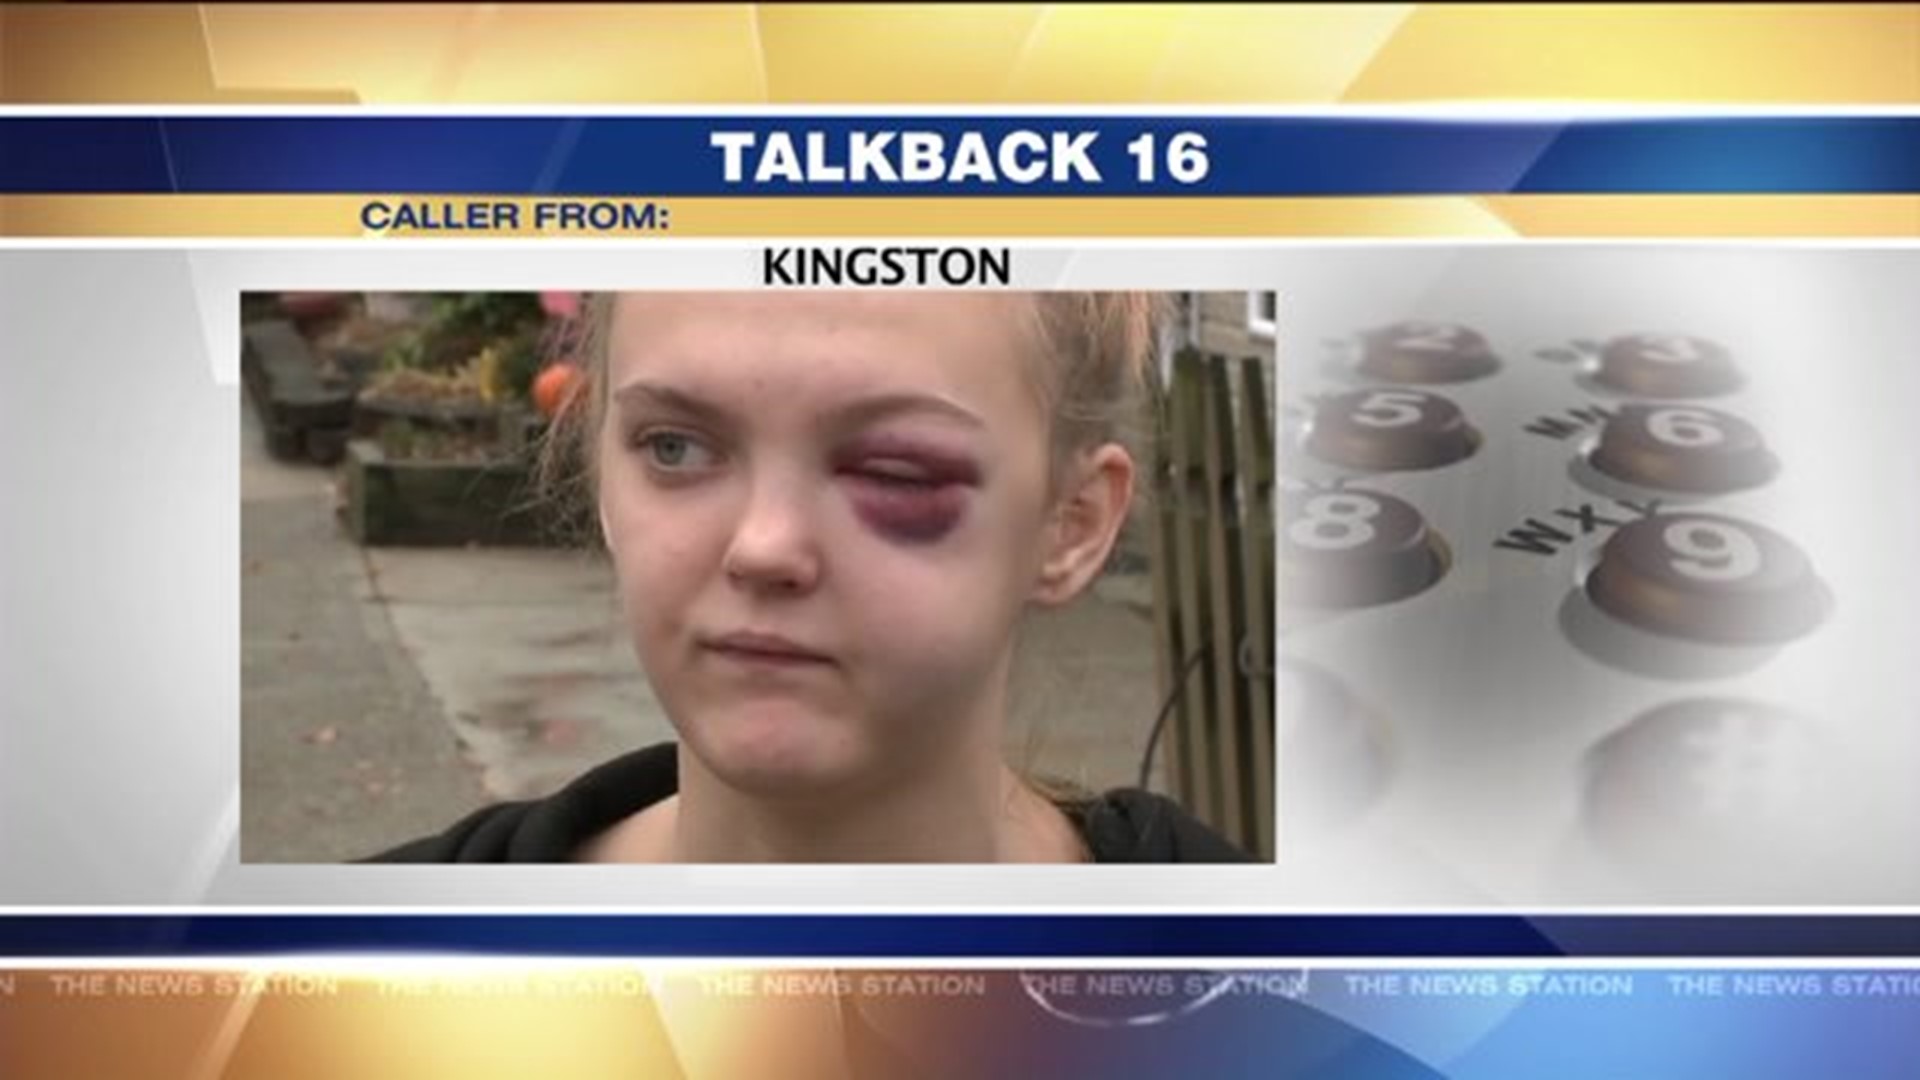 Talkback 16: Student Punched by Classmate, Teacher Acquitted